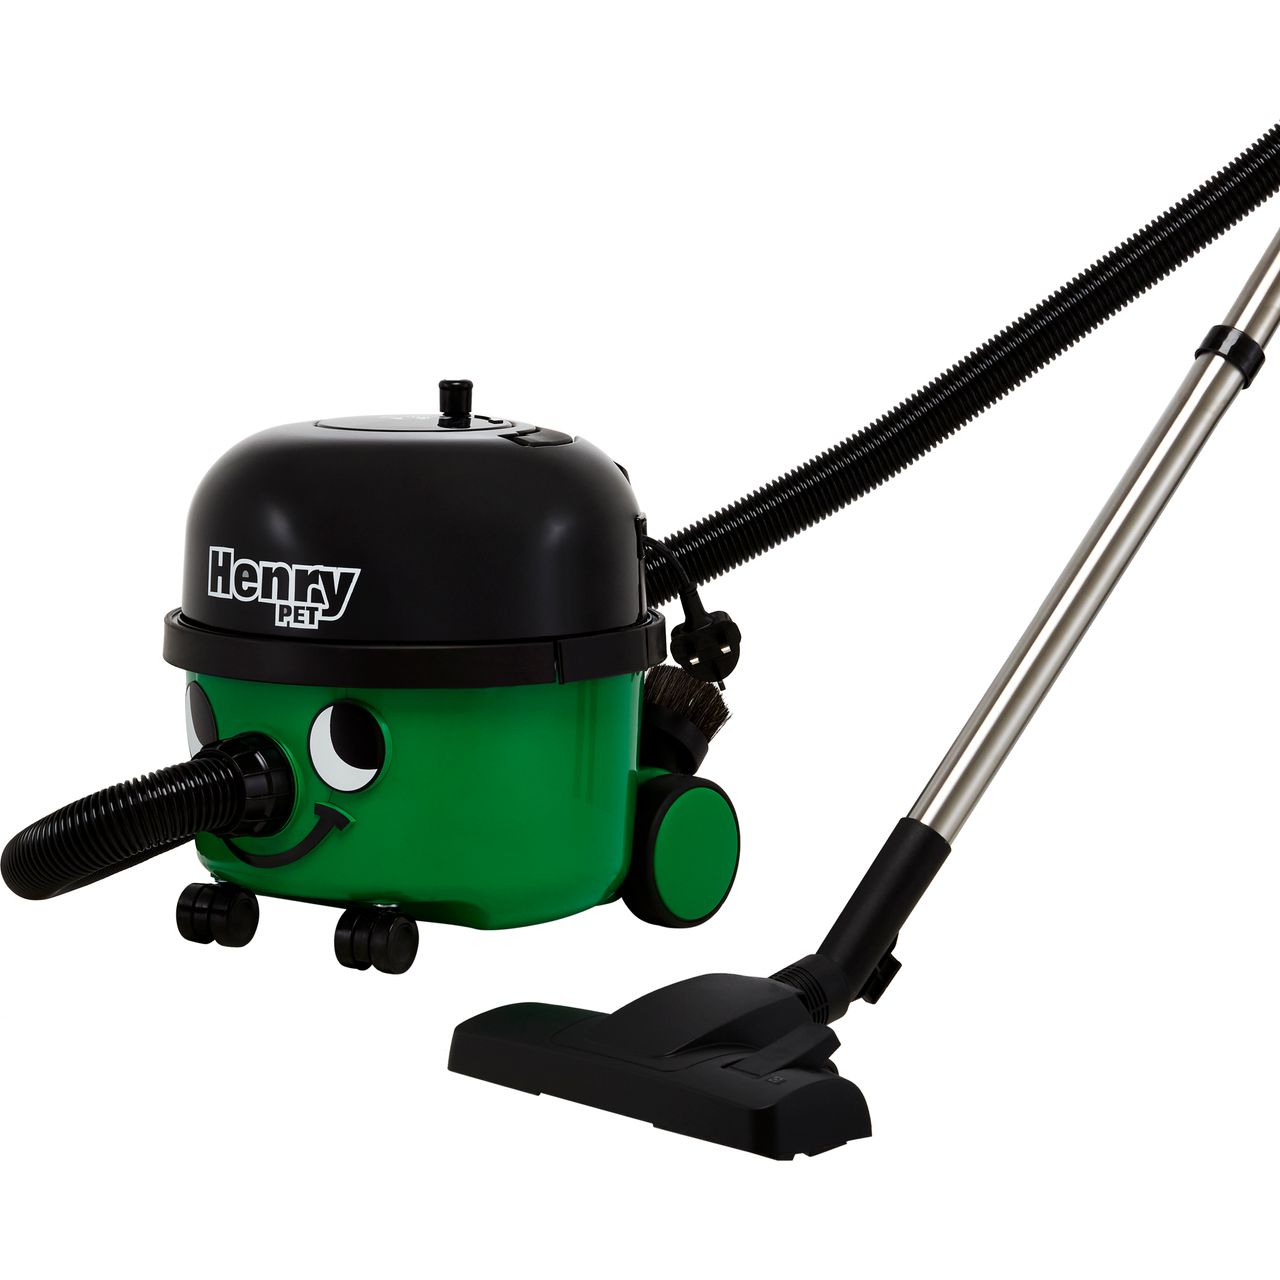 Henry XL Plus Bagged Cylinder Vacuum Cleaner